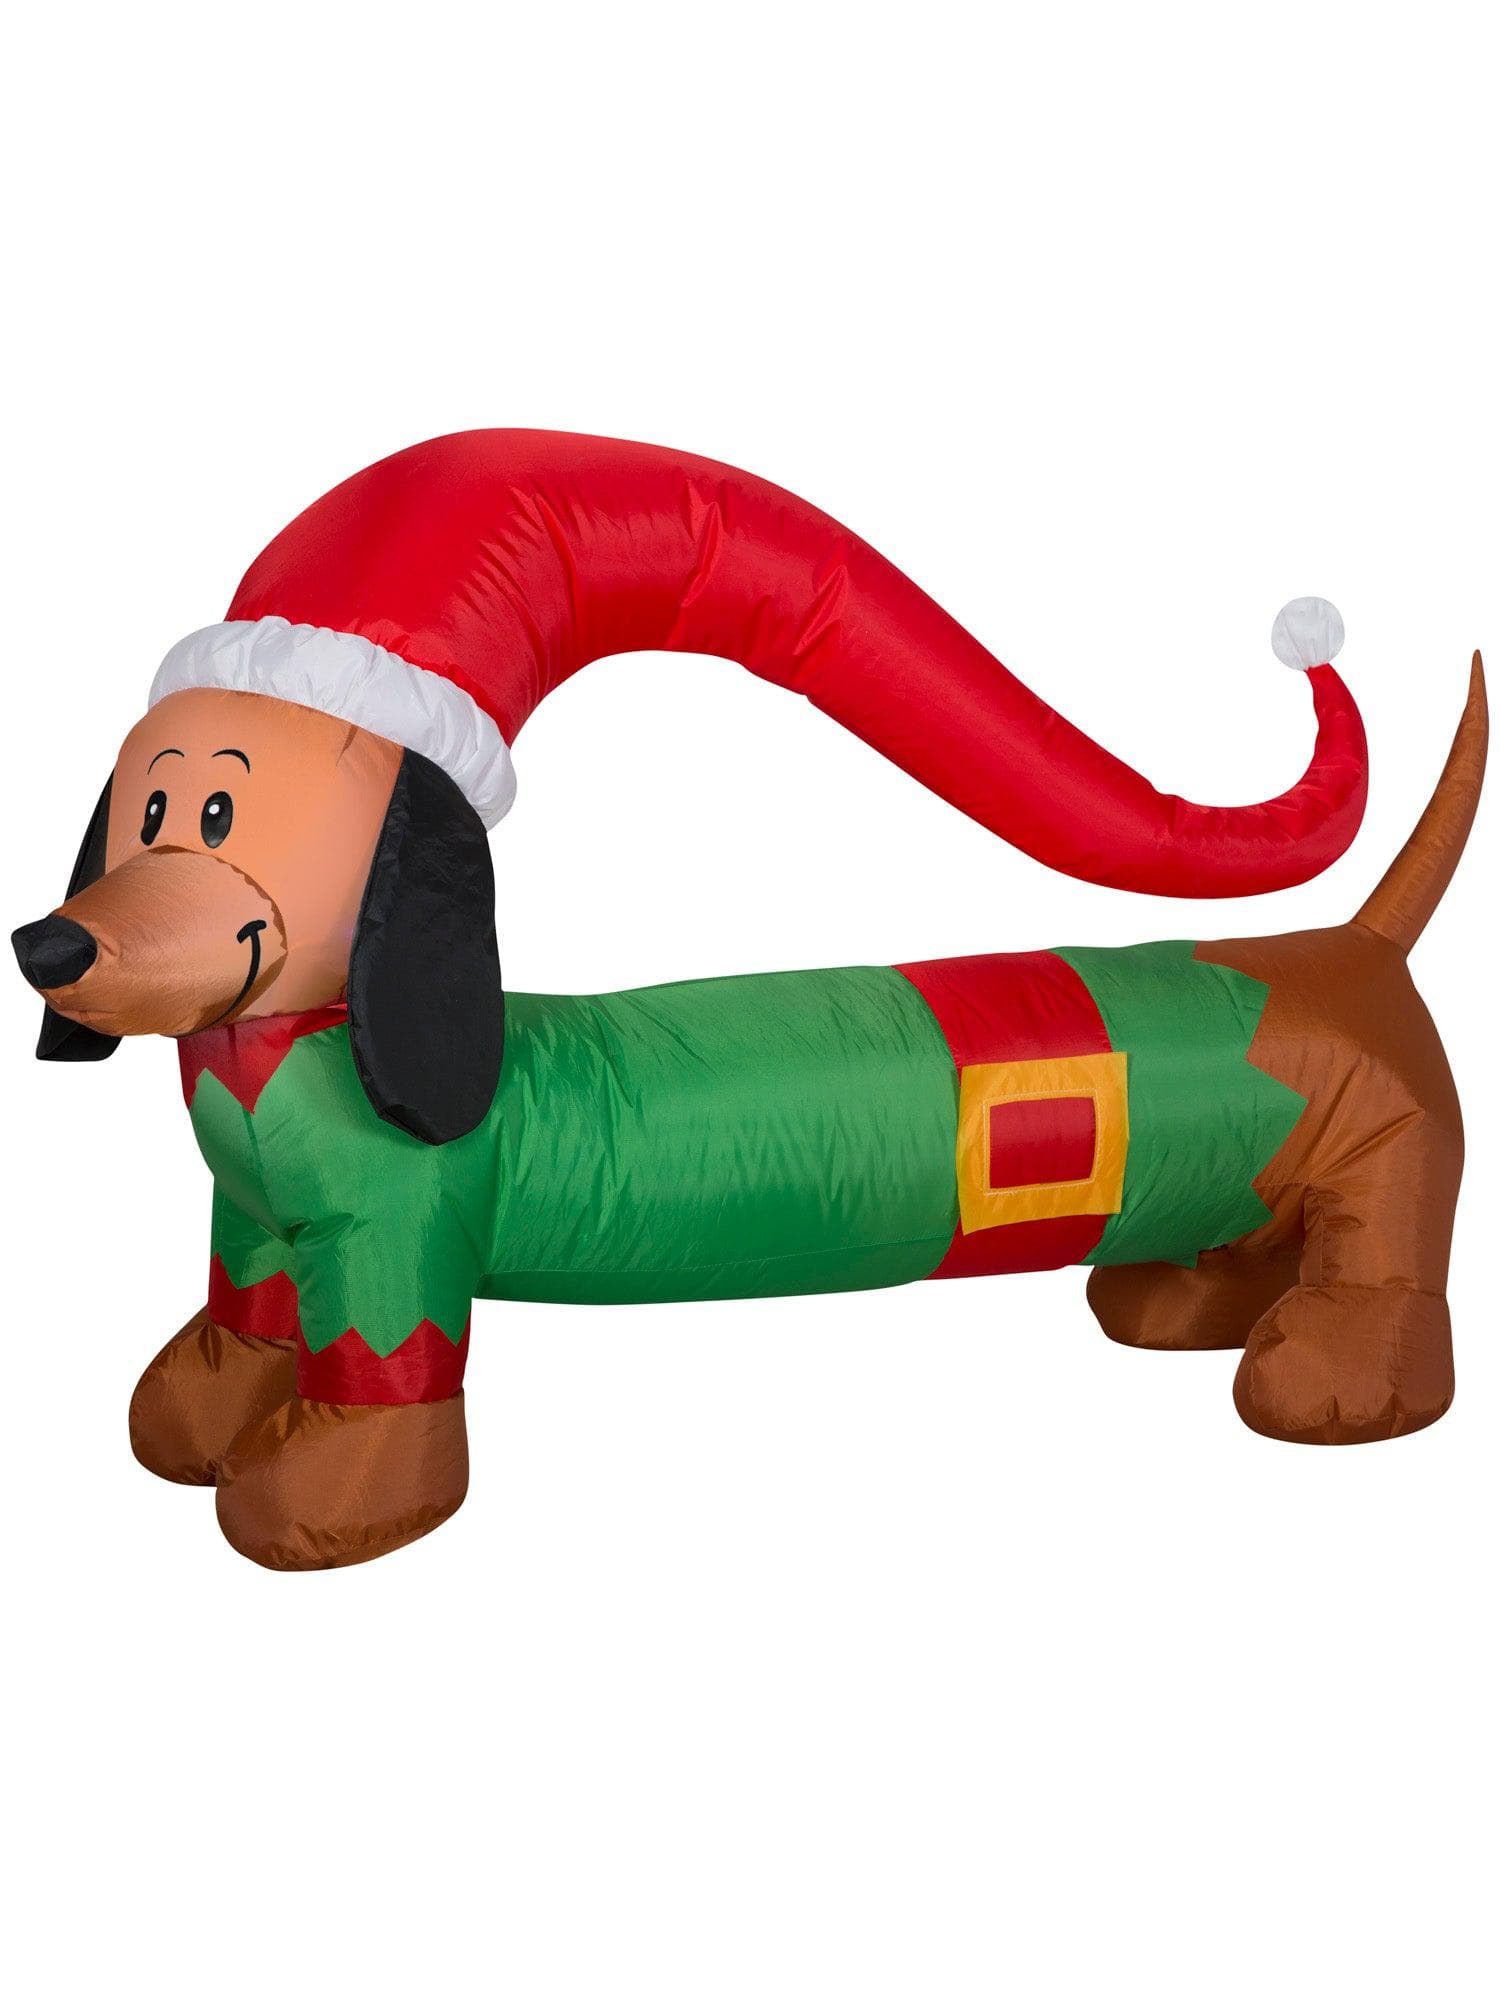 4 Foot Weiner Dog Light Up Christmas Inflatable Lawn Decor - costumes.com